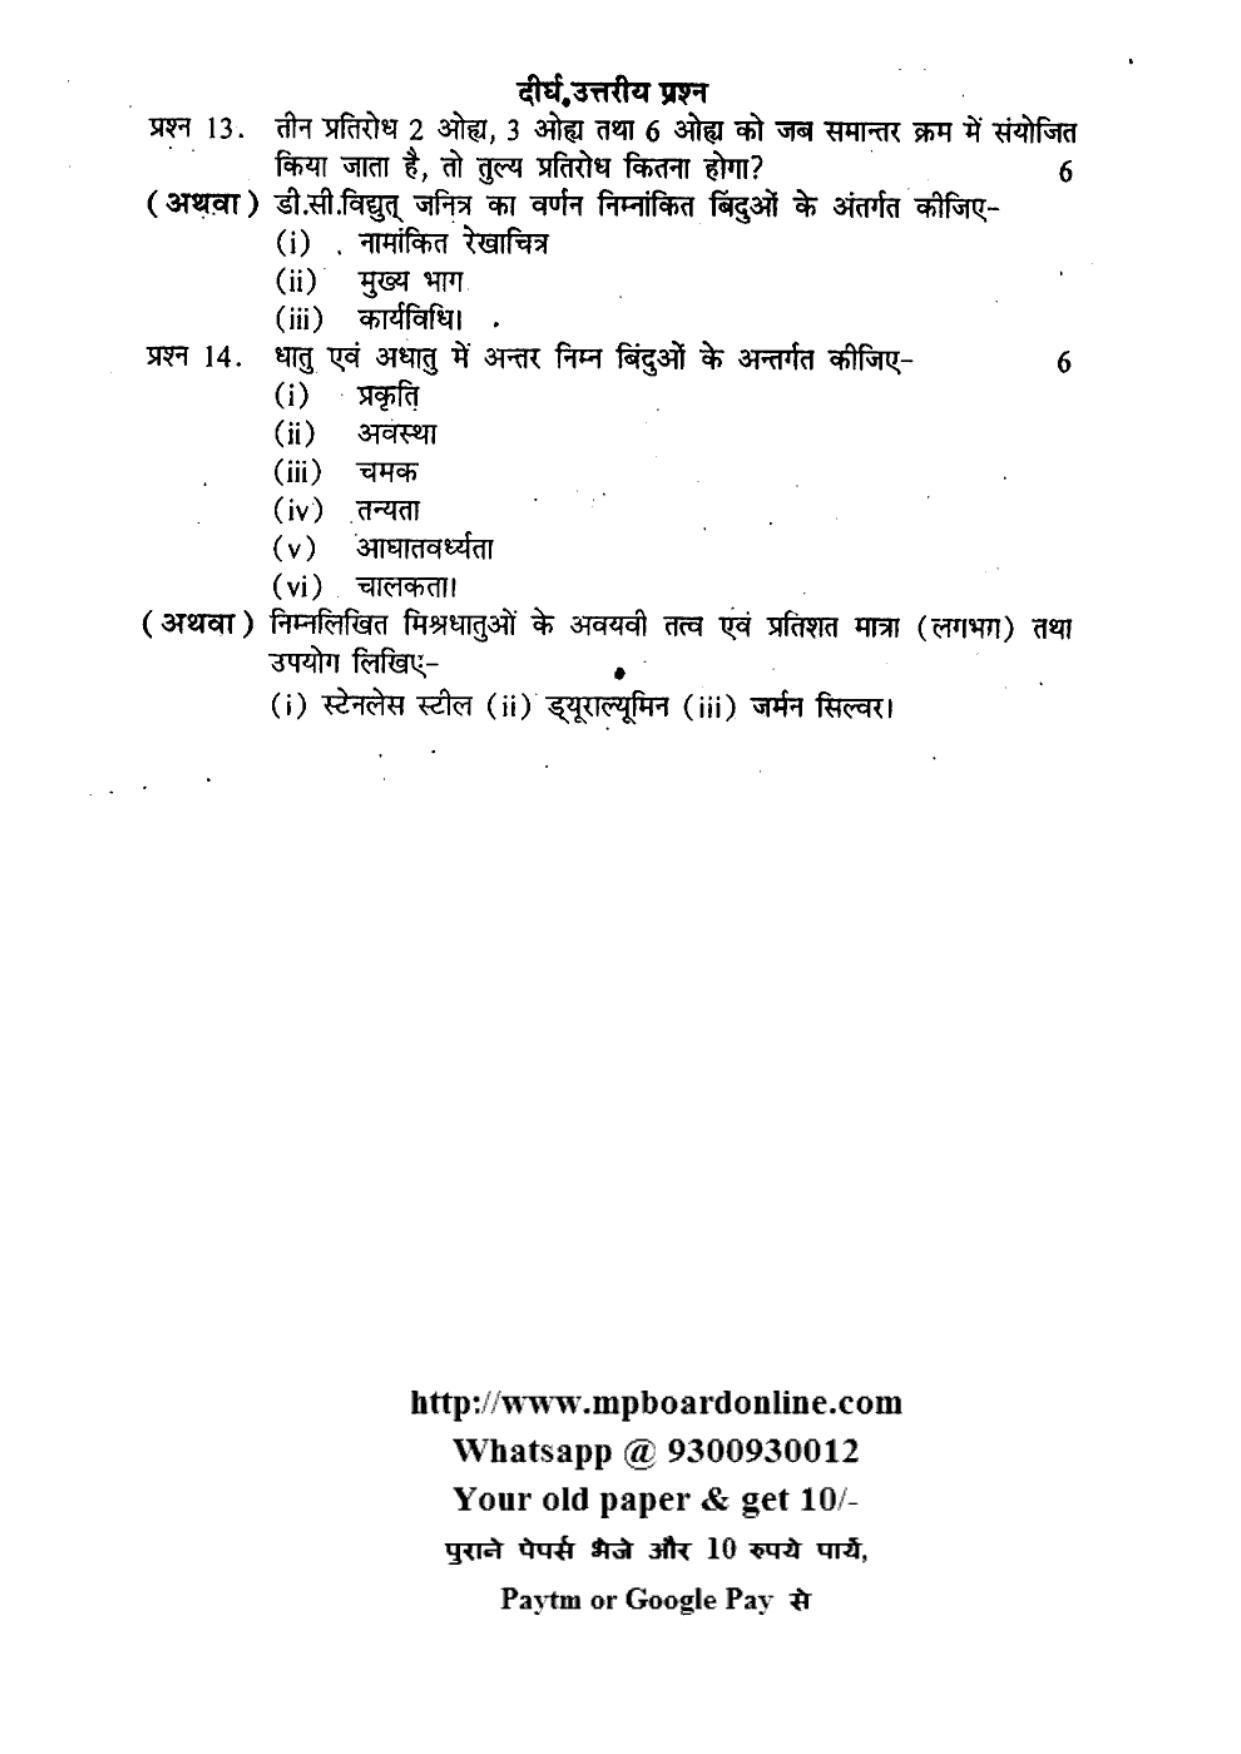 MP Board Class 10 Science (Hindi Medium) 2012 Question Paper - Page 3